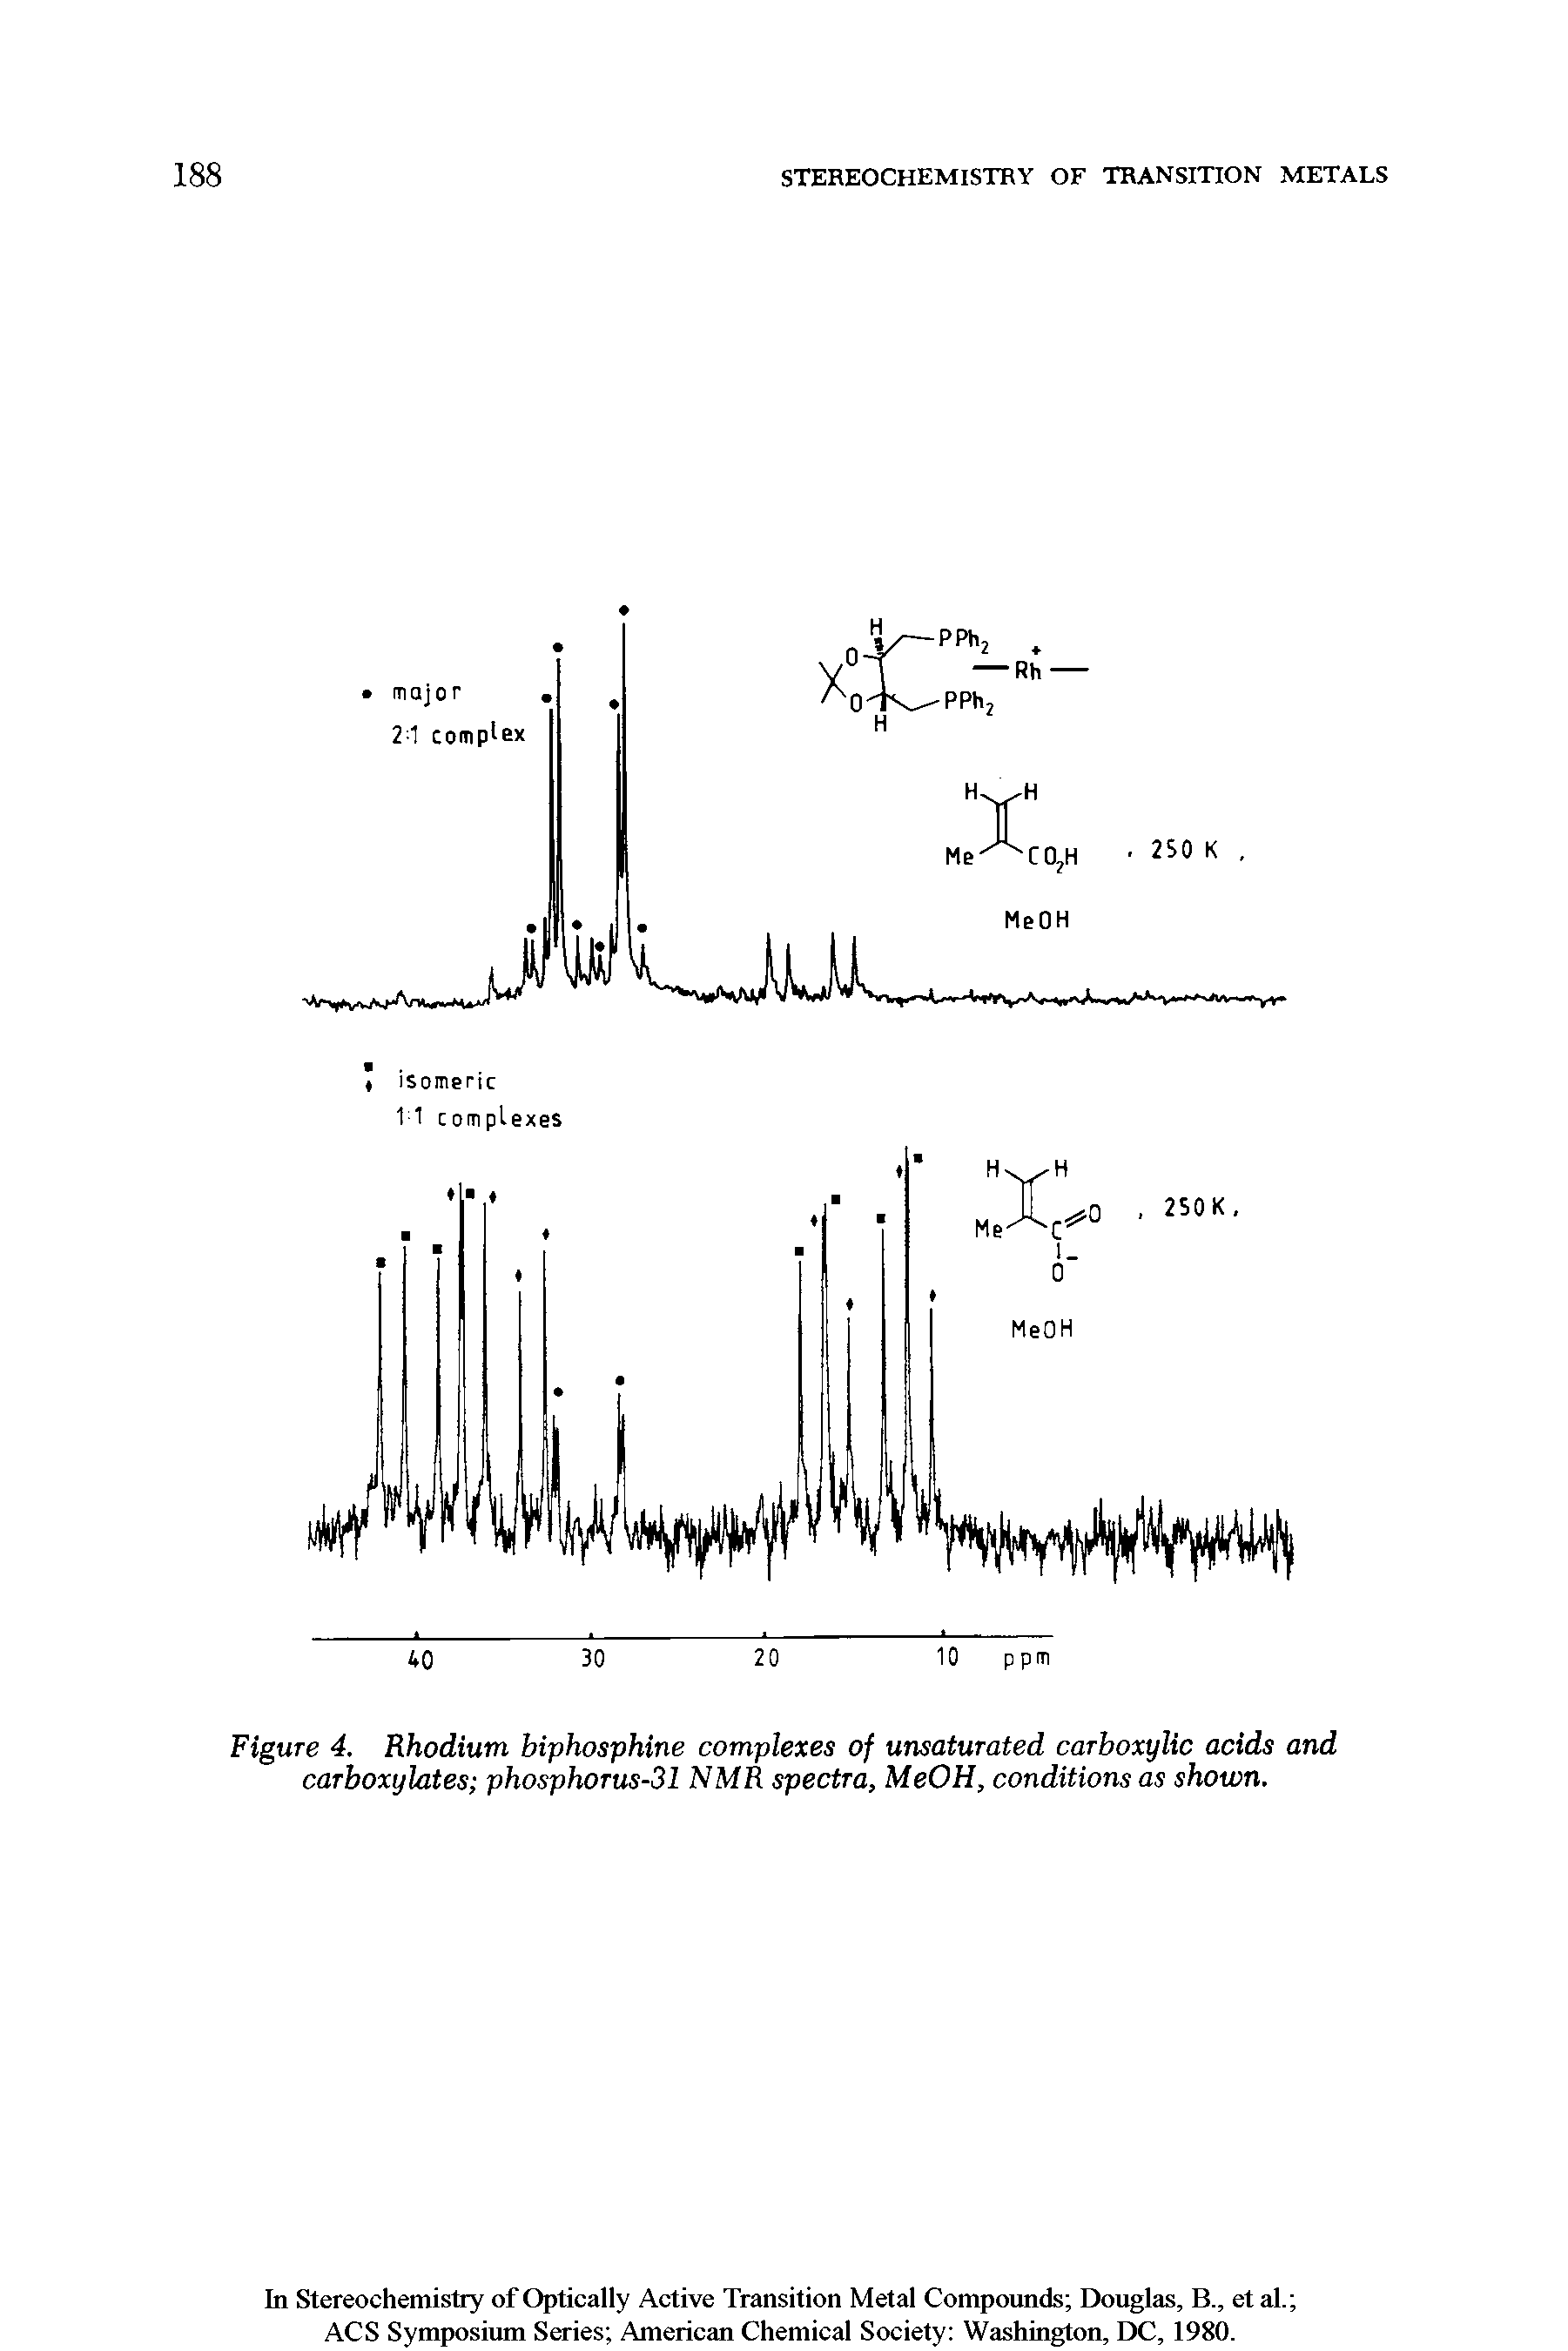 Figure 4. Rhodium biphosphine complexes of unsaturated carboxylic acids and carboxylates phosphorus-31 NMR spectra, MeOH, conditions as shown.